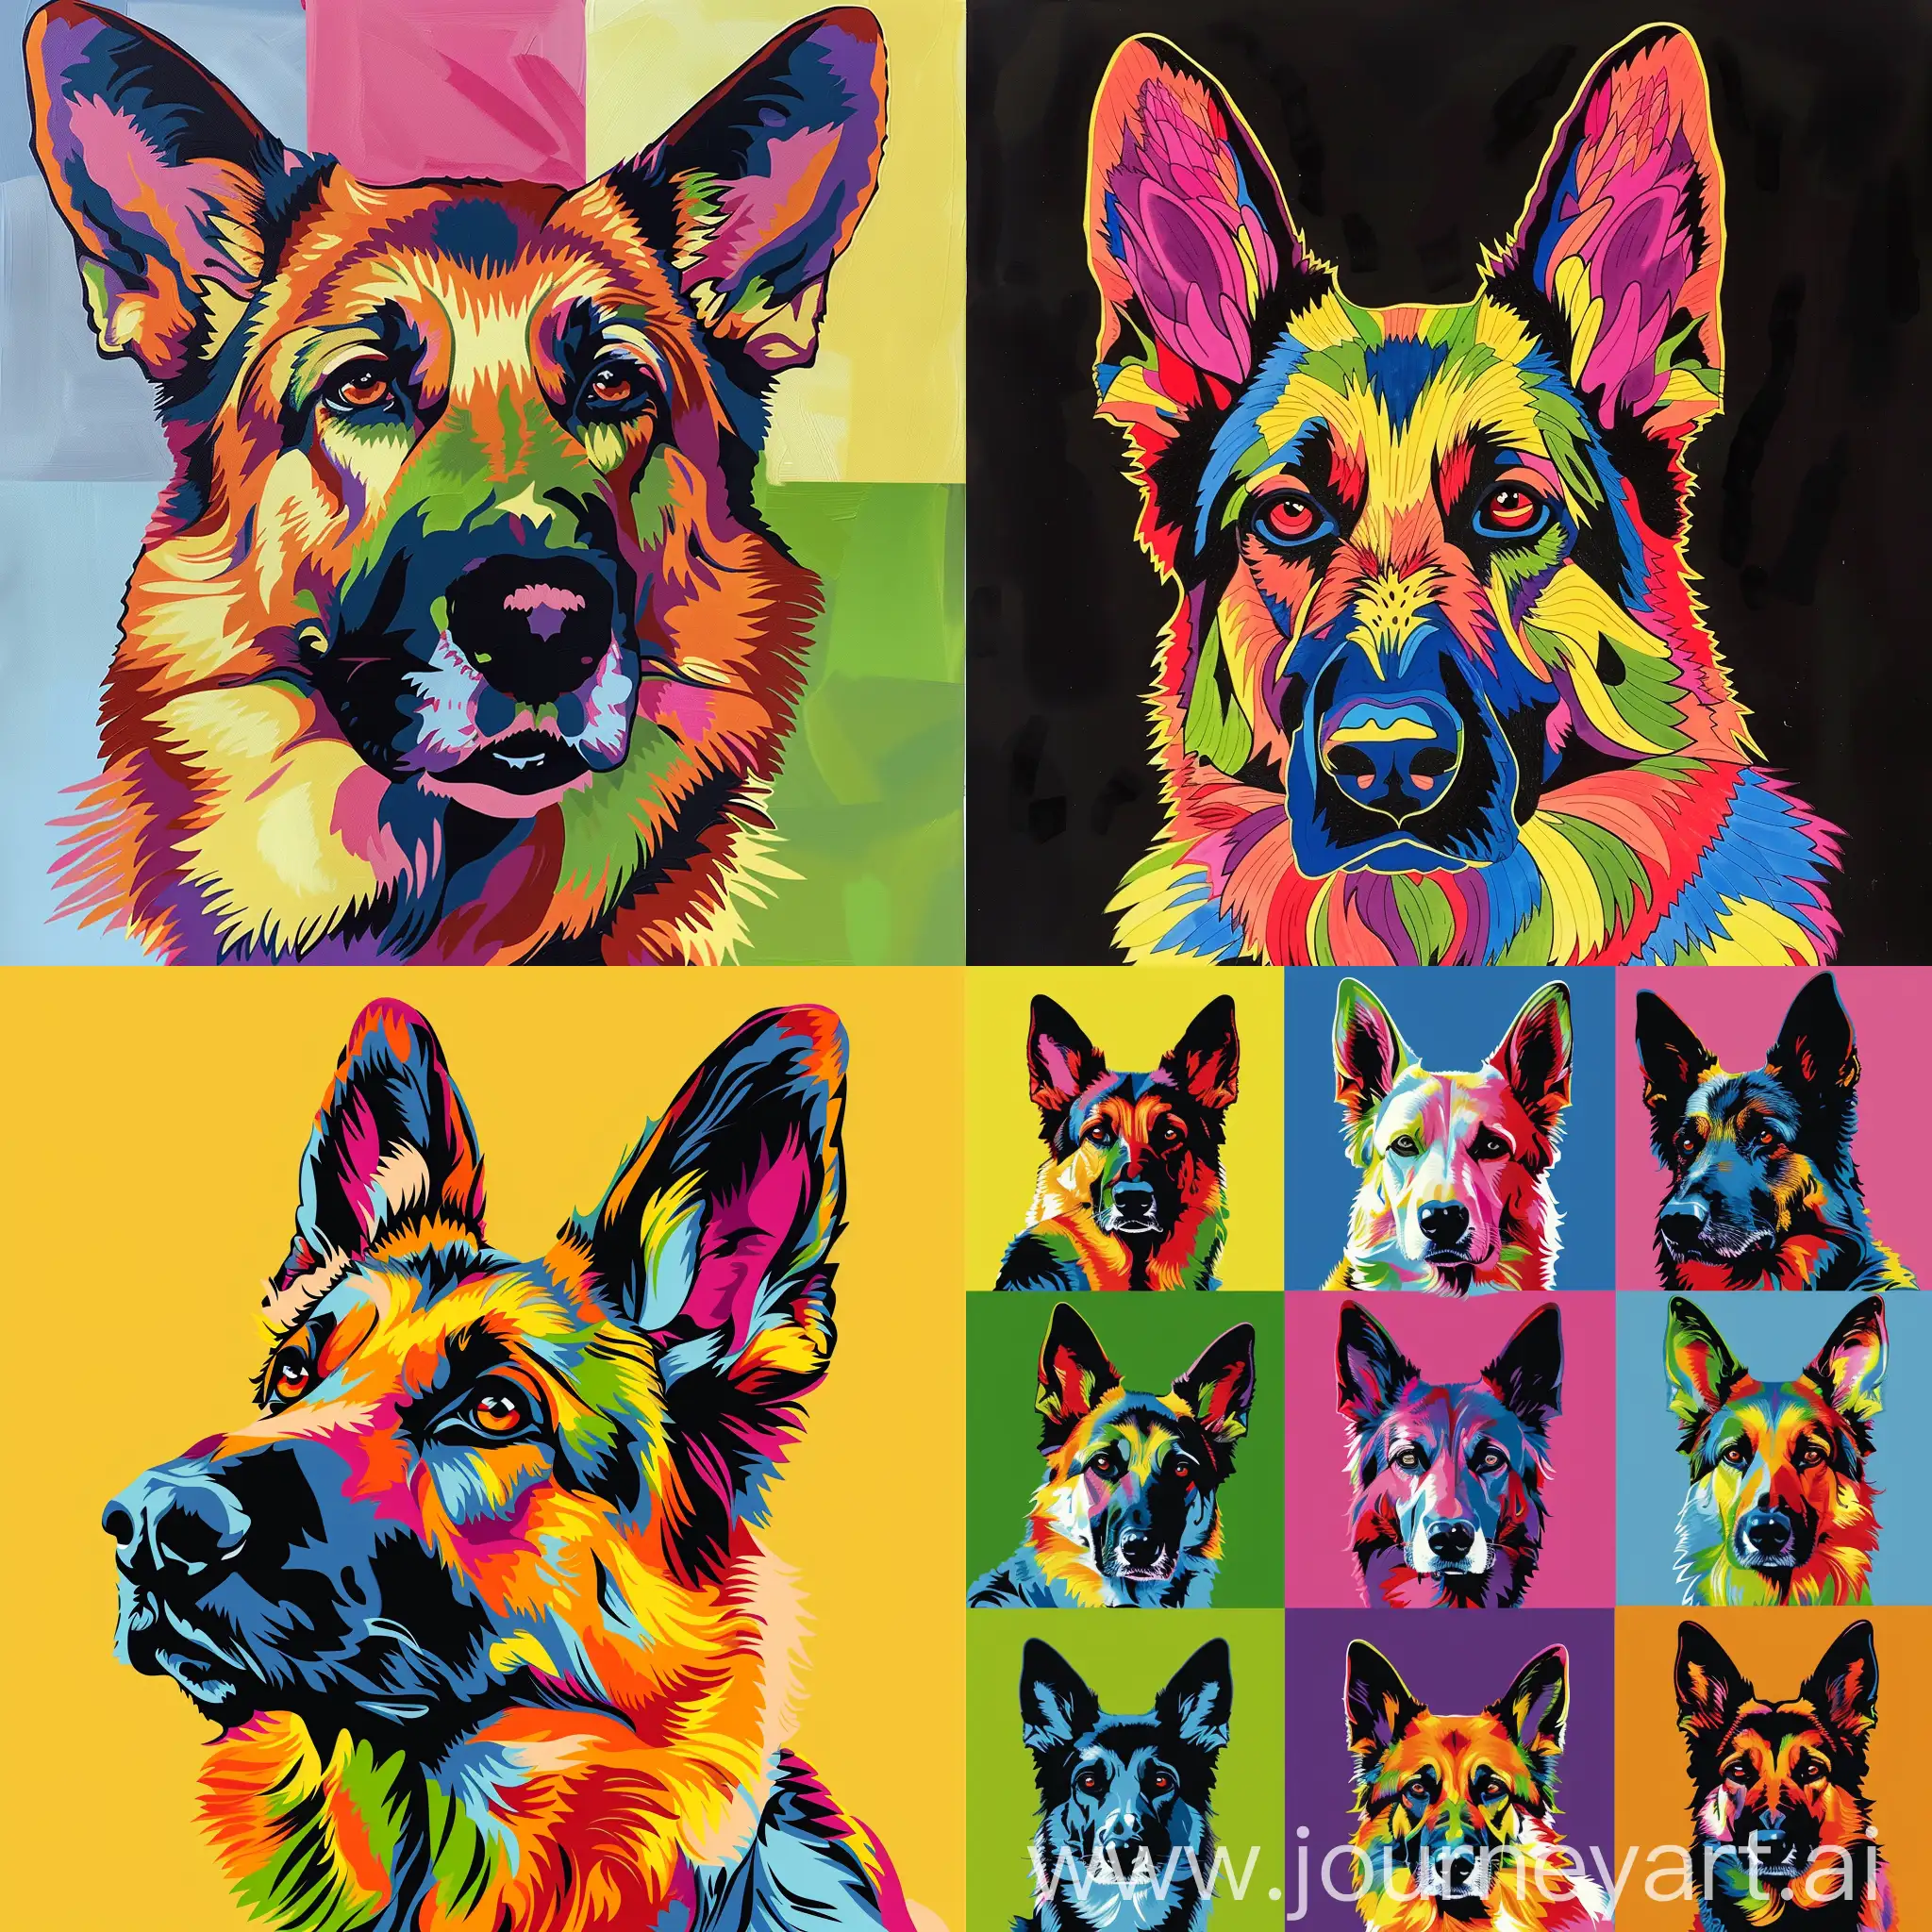 German shepherd portrait coloured in different bright colours and with black lining